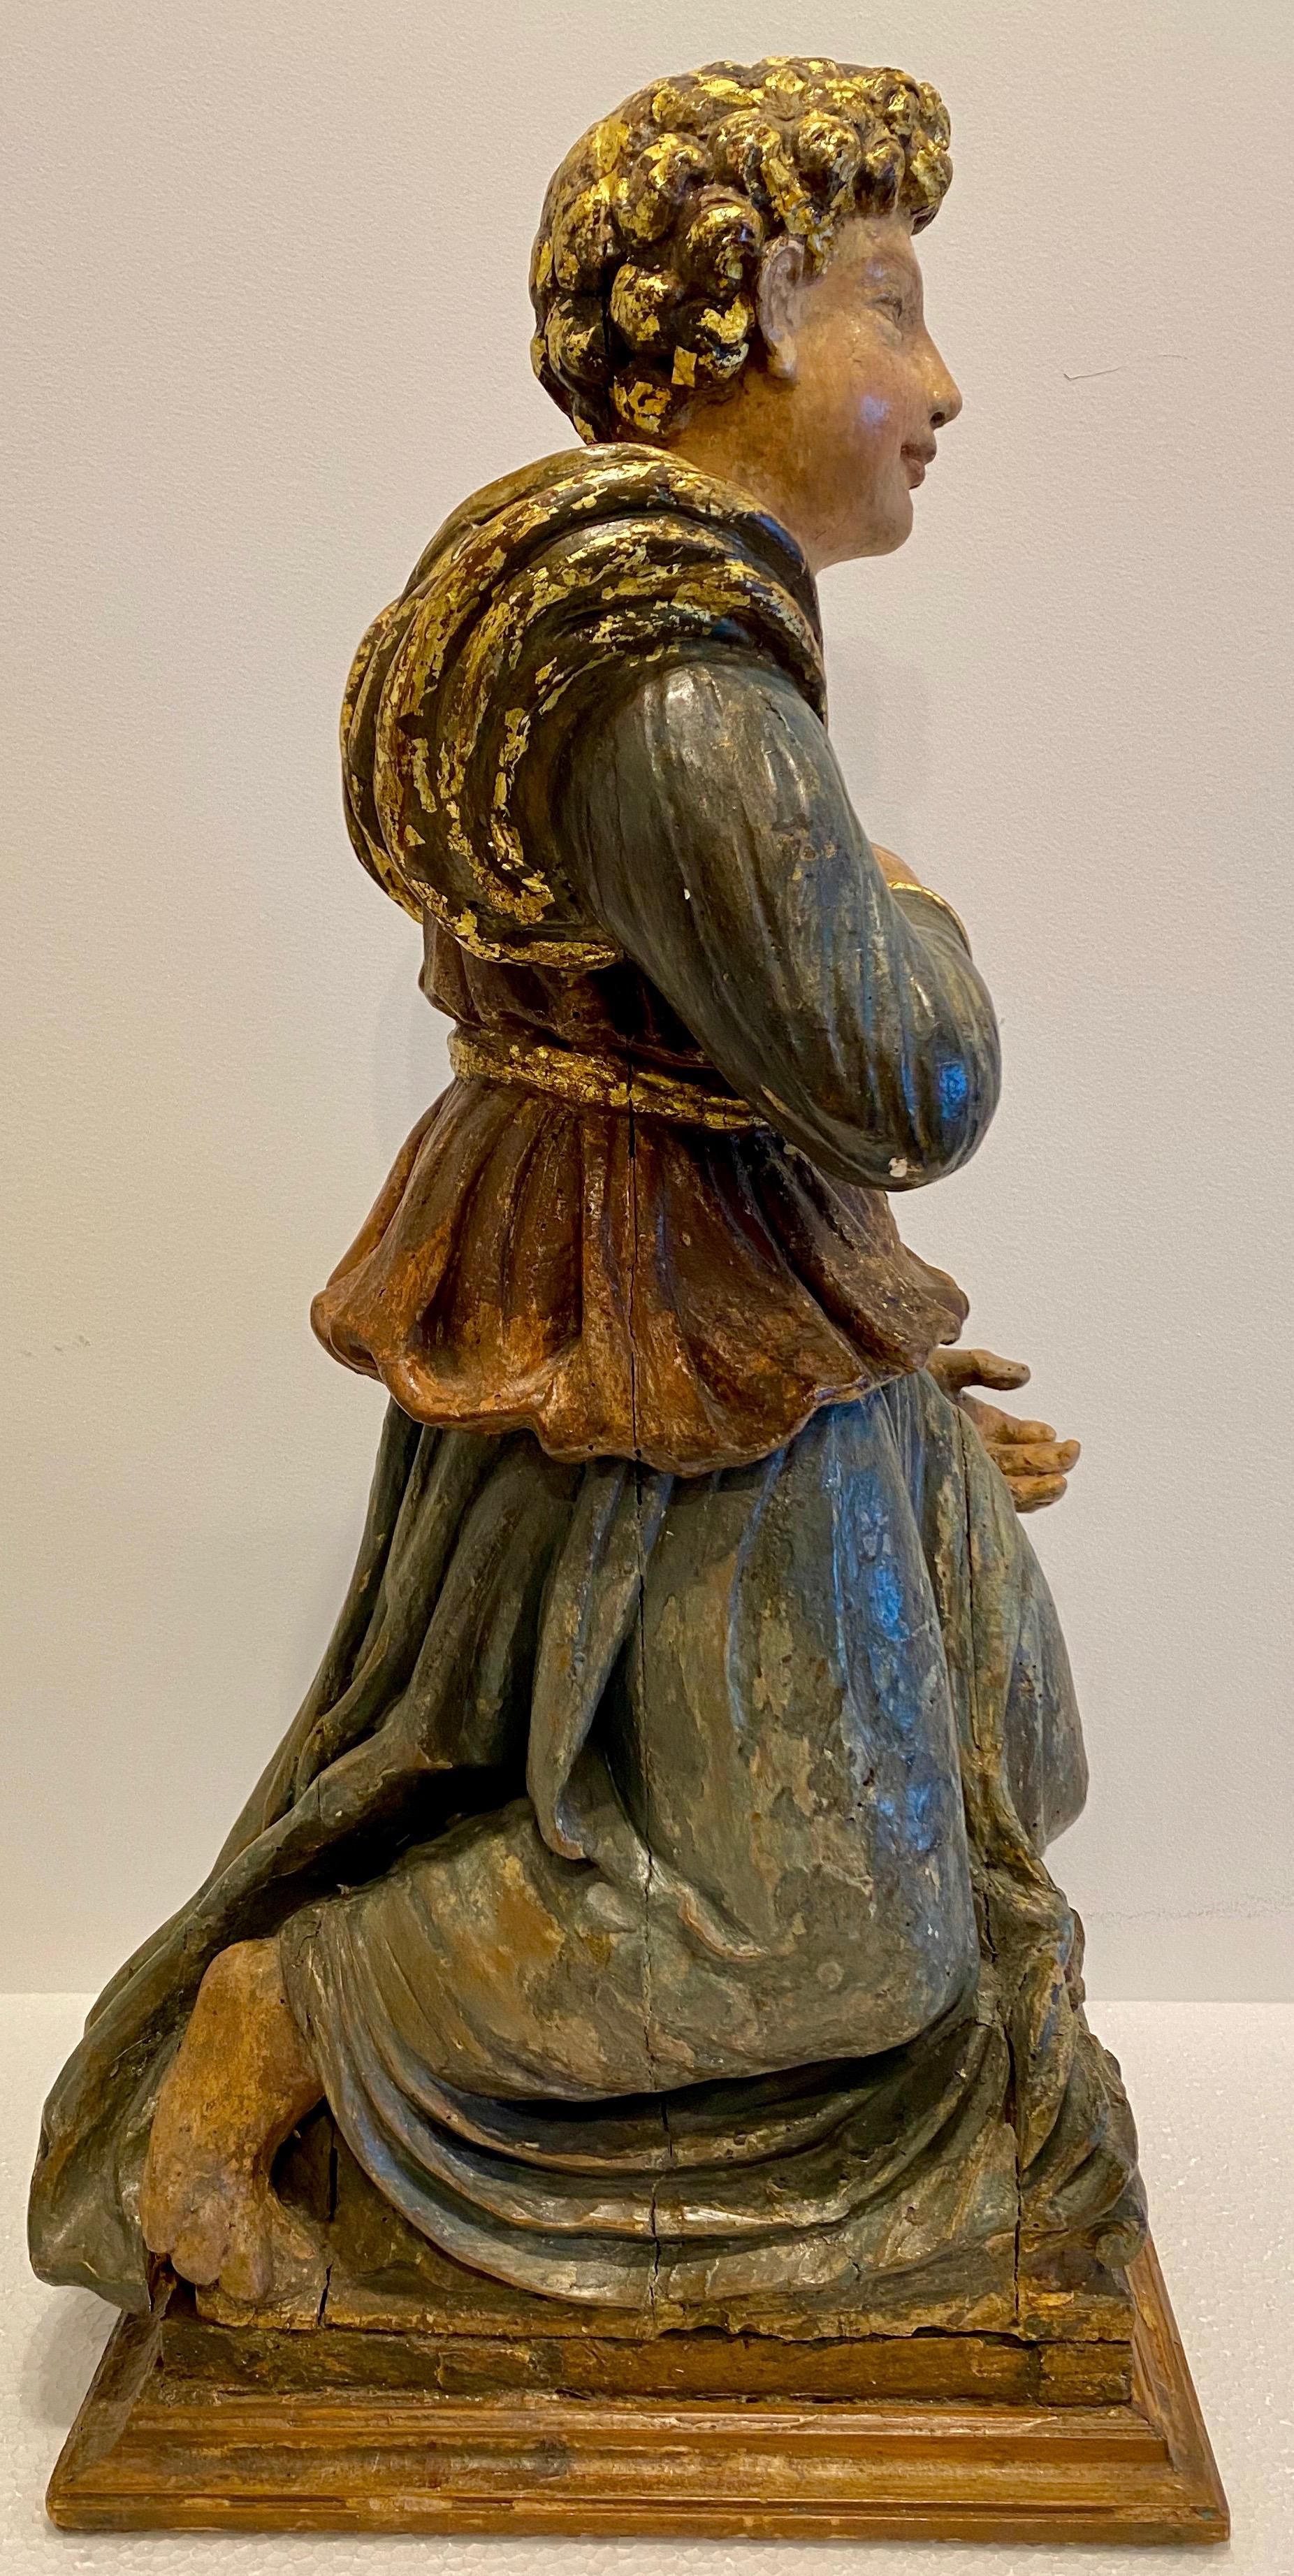 Italian Painted and Lacquered Wooden Sculpture of a Kneeling Figure, Circa 1650 For Sale 4